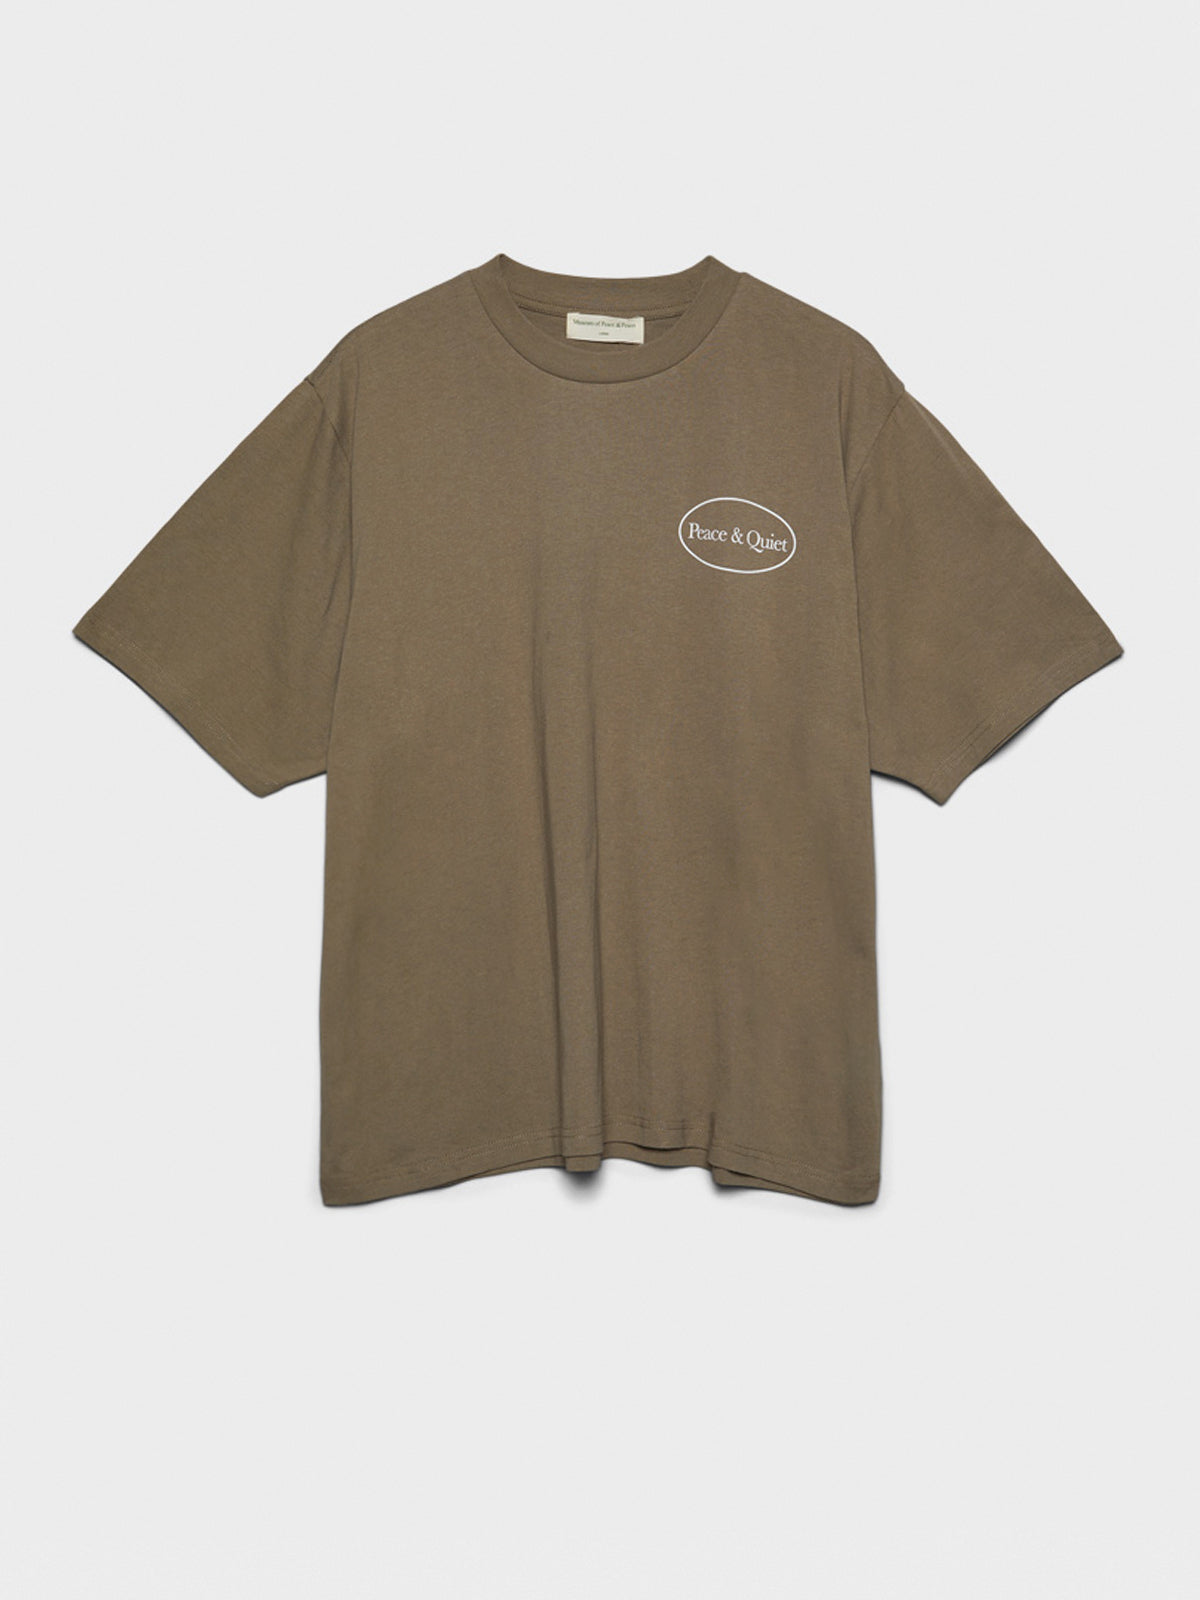 Museum Hours T-Shirt in Brown